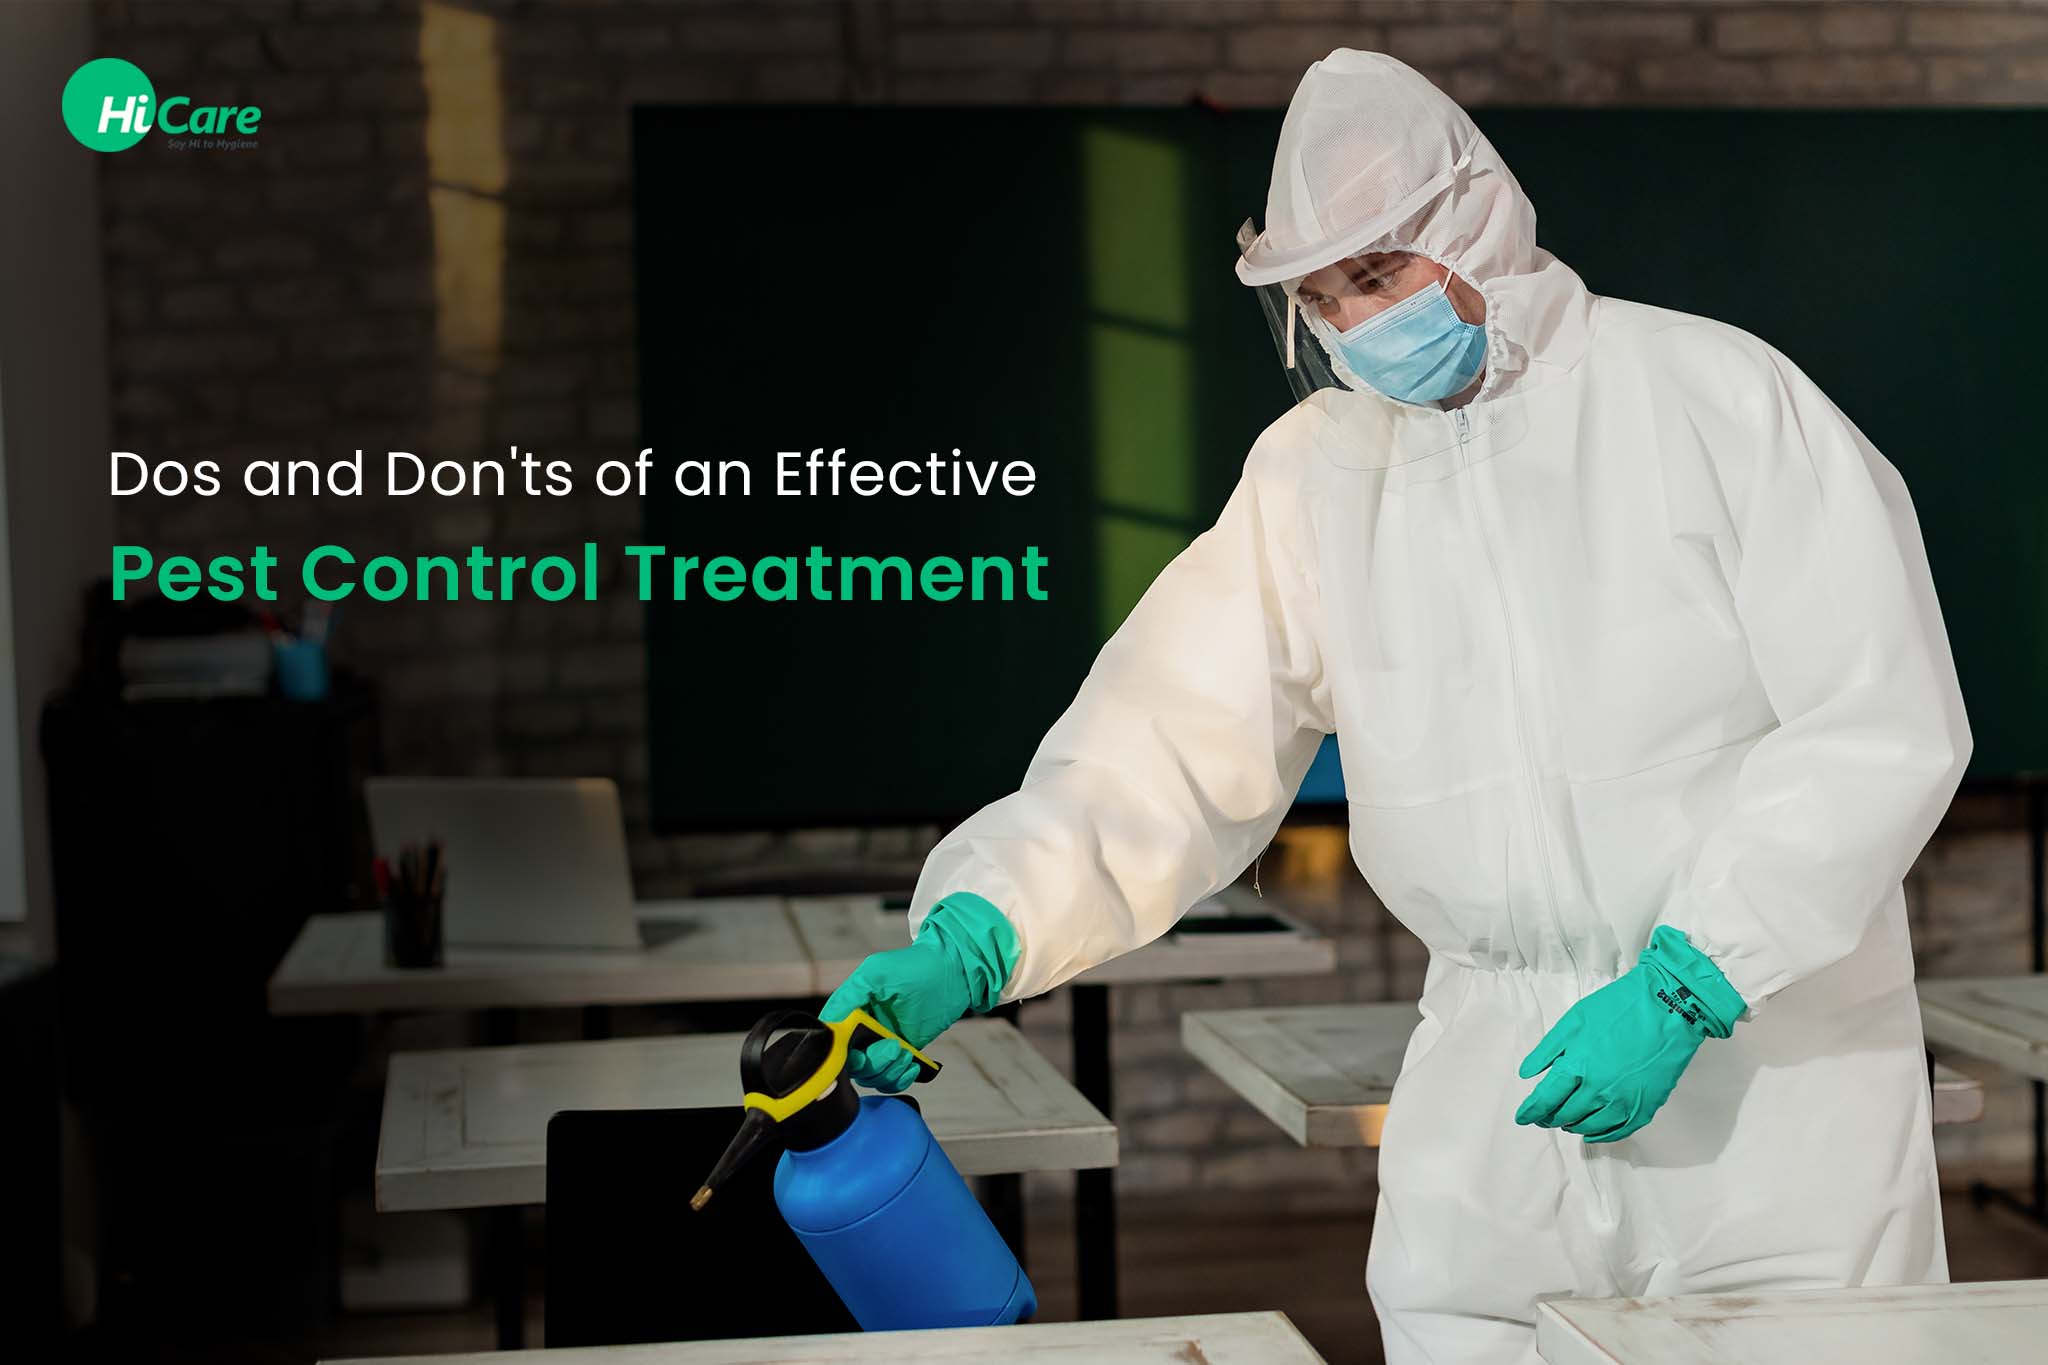 5 Dos and Don'ts for a Successful Pest Control Treatment | HiCare